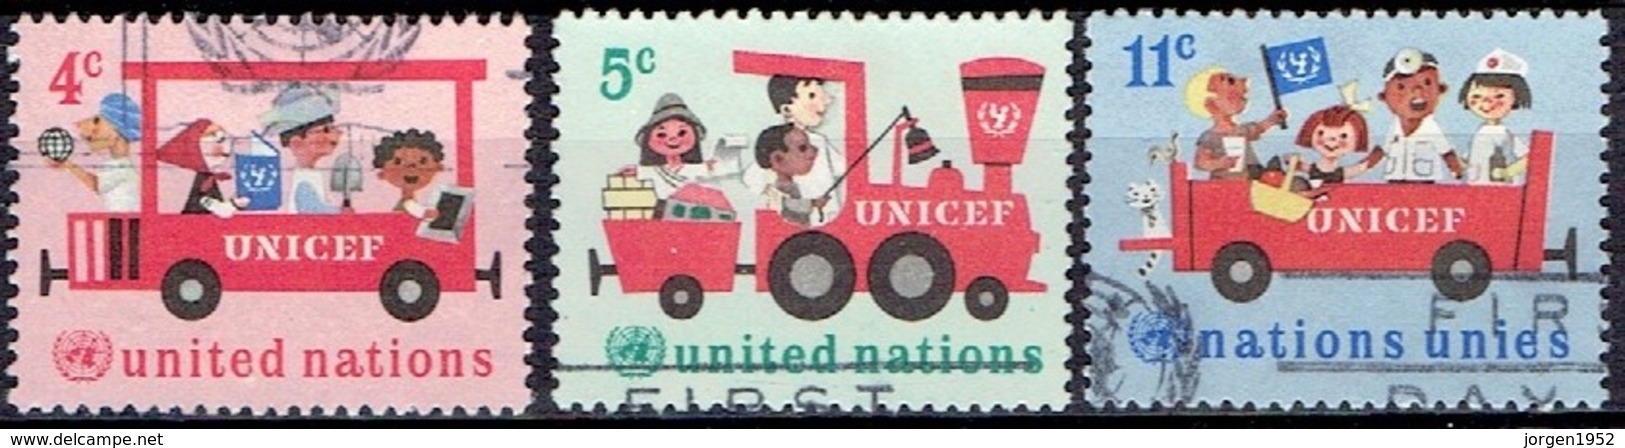 UNITED NATIONS # NEW YORK FROM 1966 STAMPWORLD 171-73 - Oblitérés